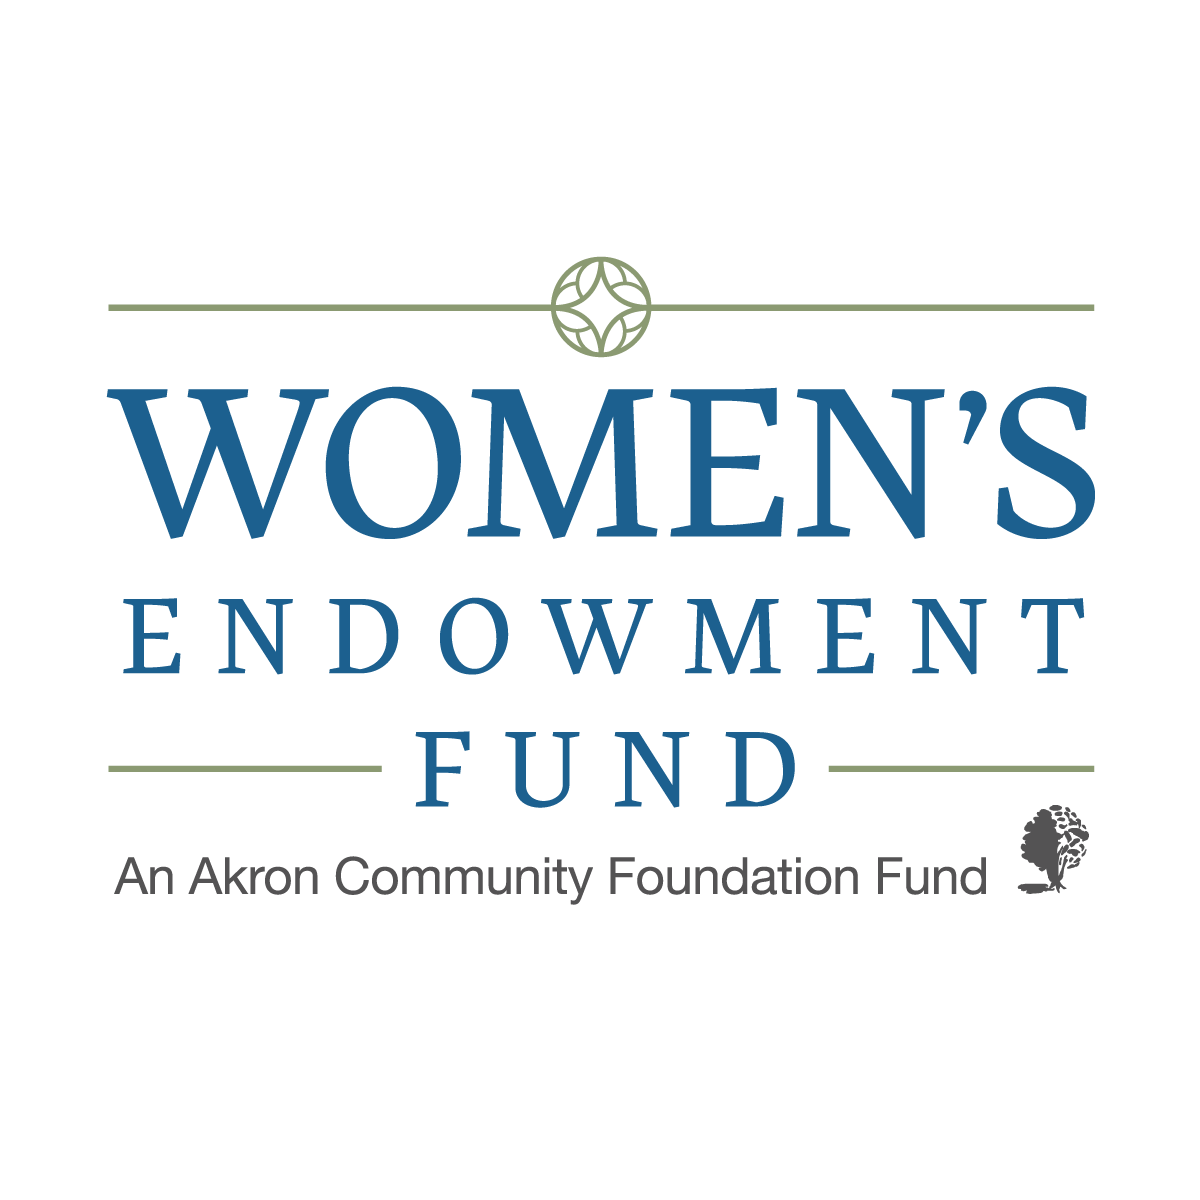 Women's Endowment Fund now accepting grant proposals for programs enriching the lives of women and girls